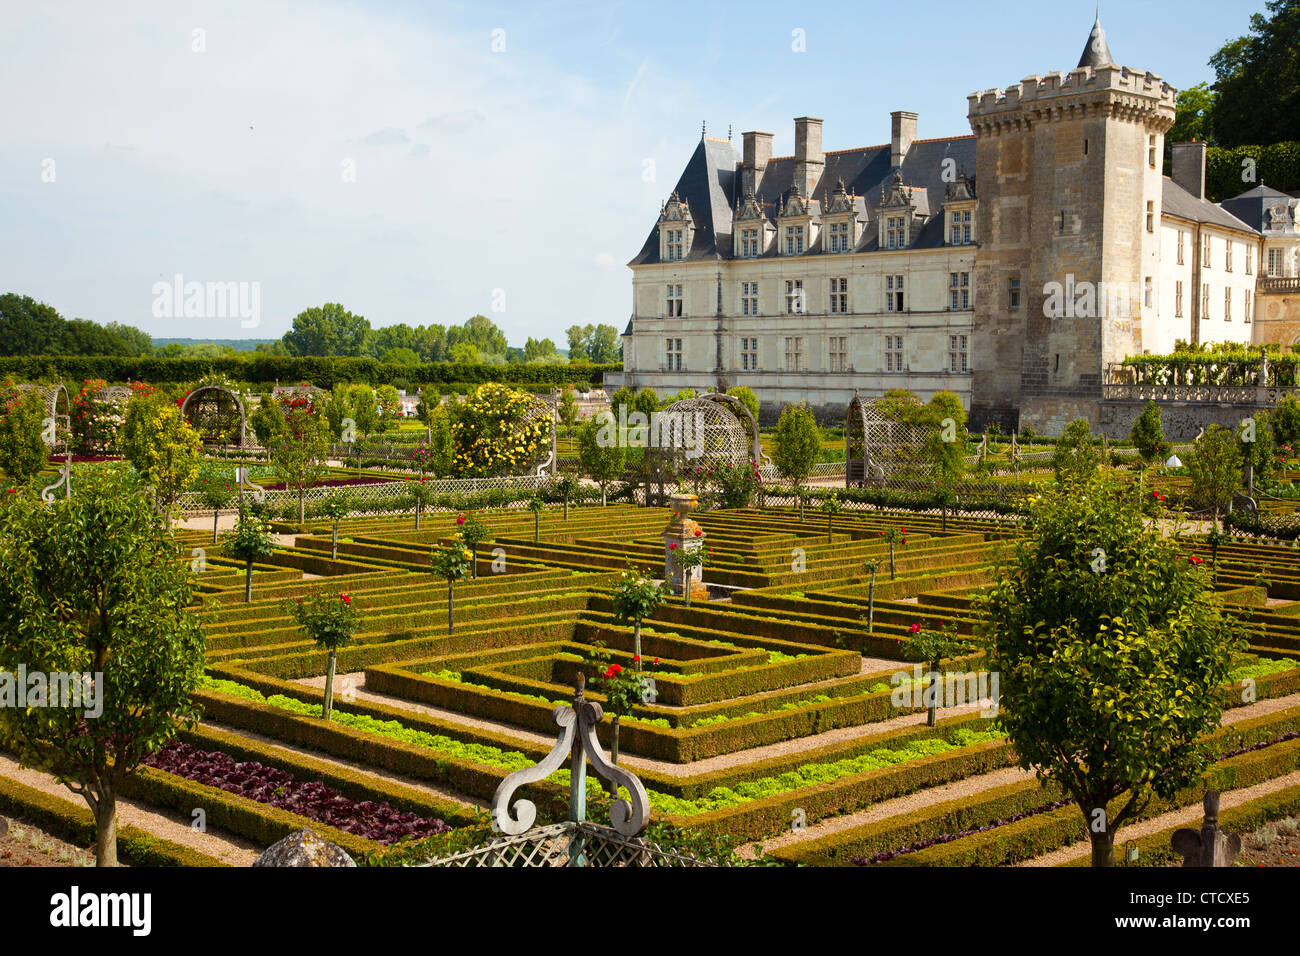 The ornamental gardens of Chateau Villandry in the Loire Valley of France. Stock Photo